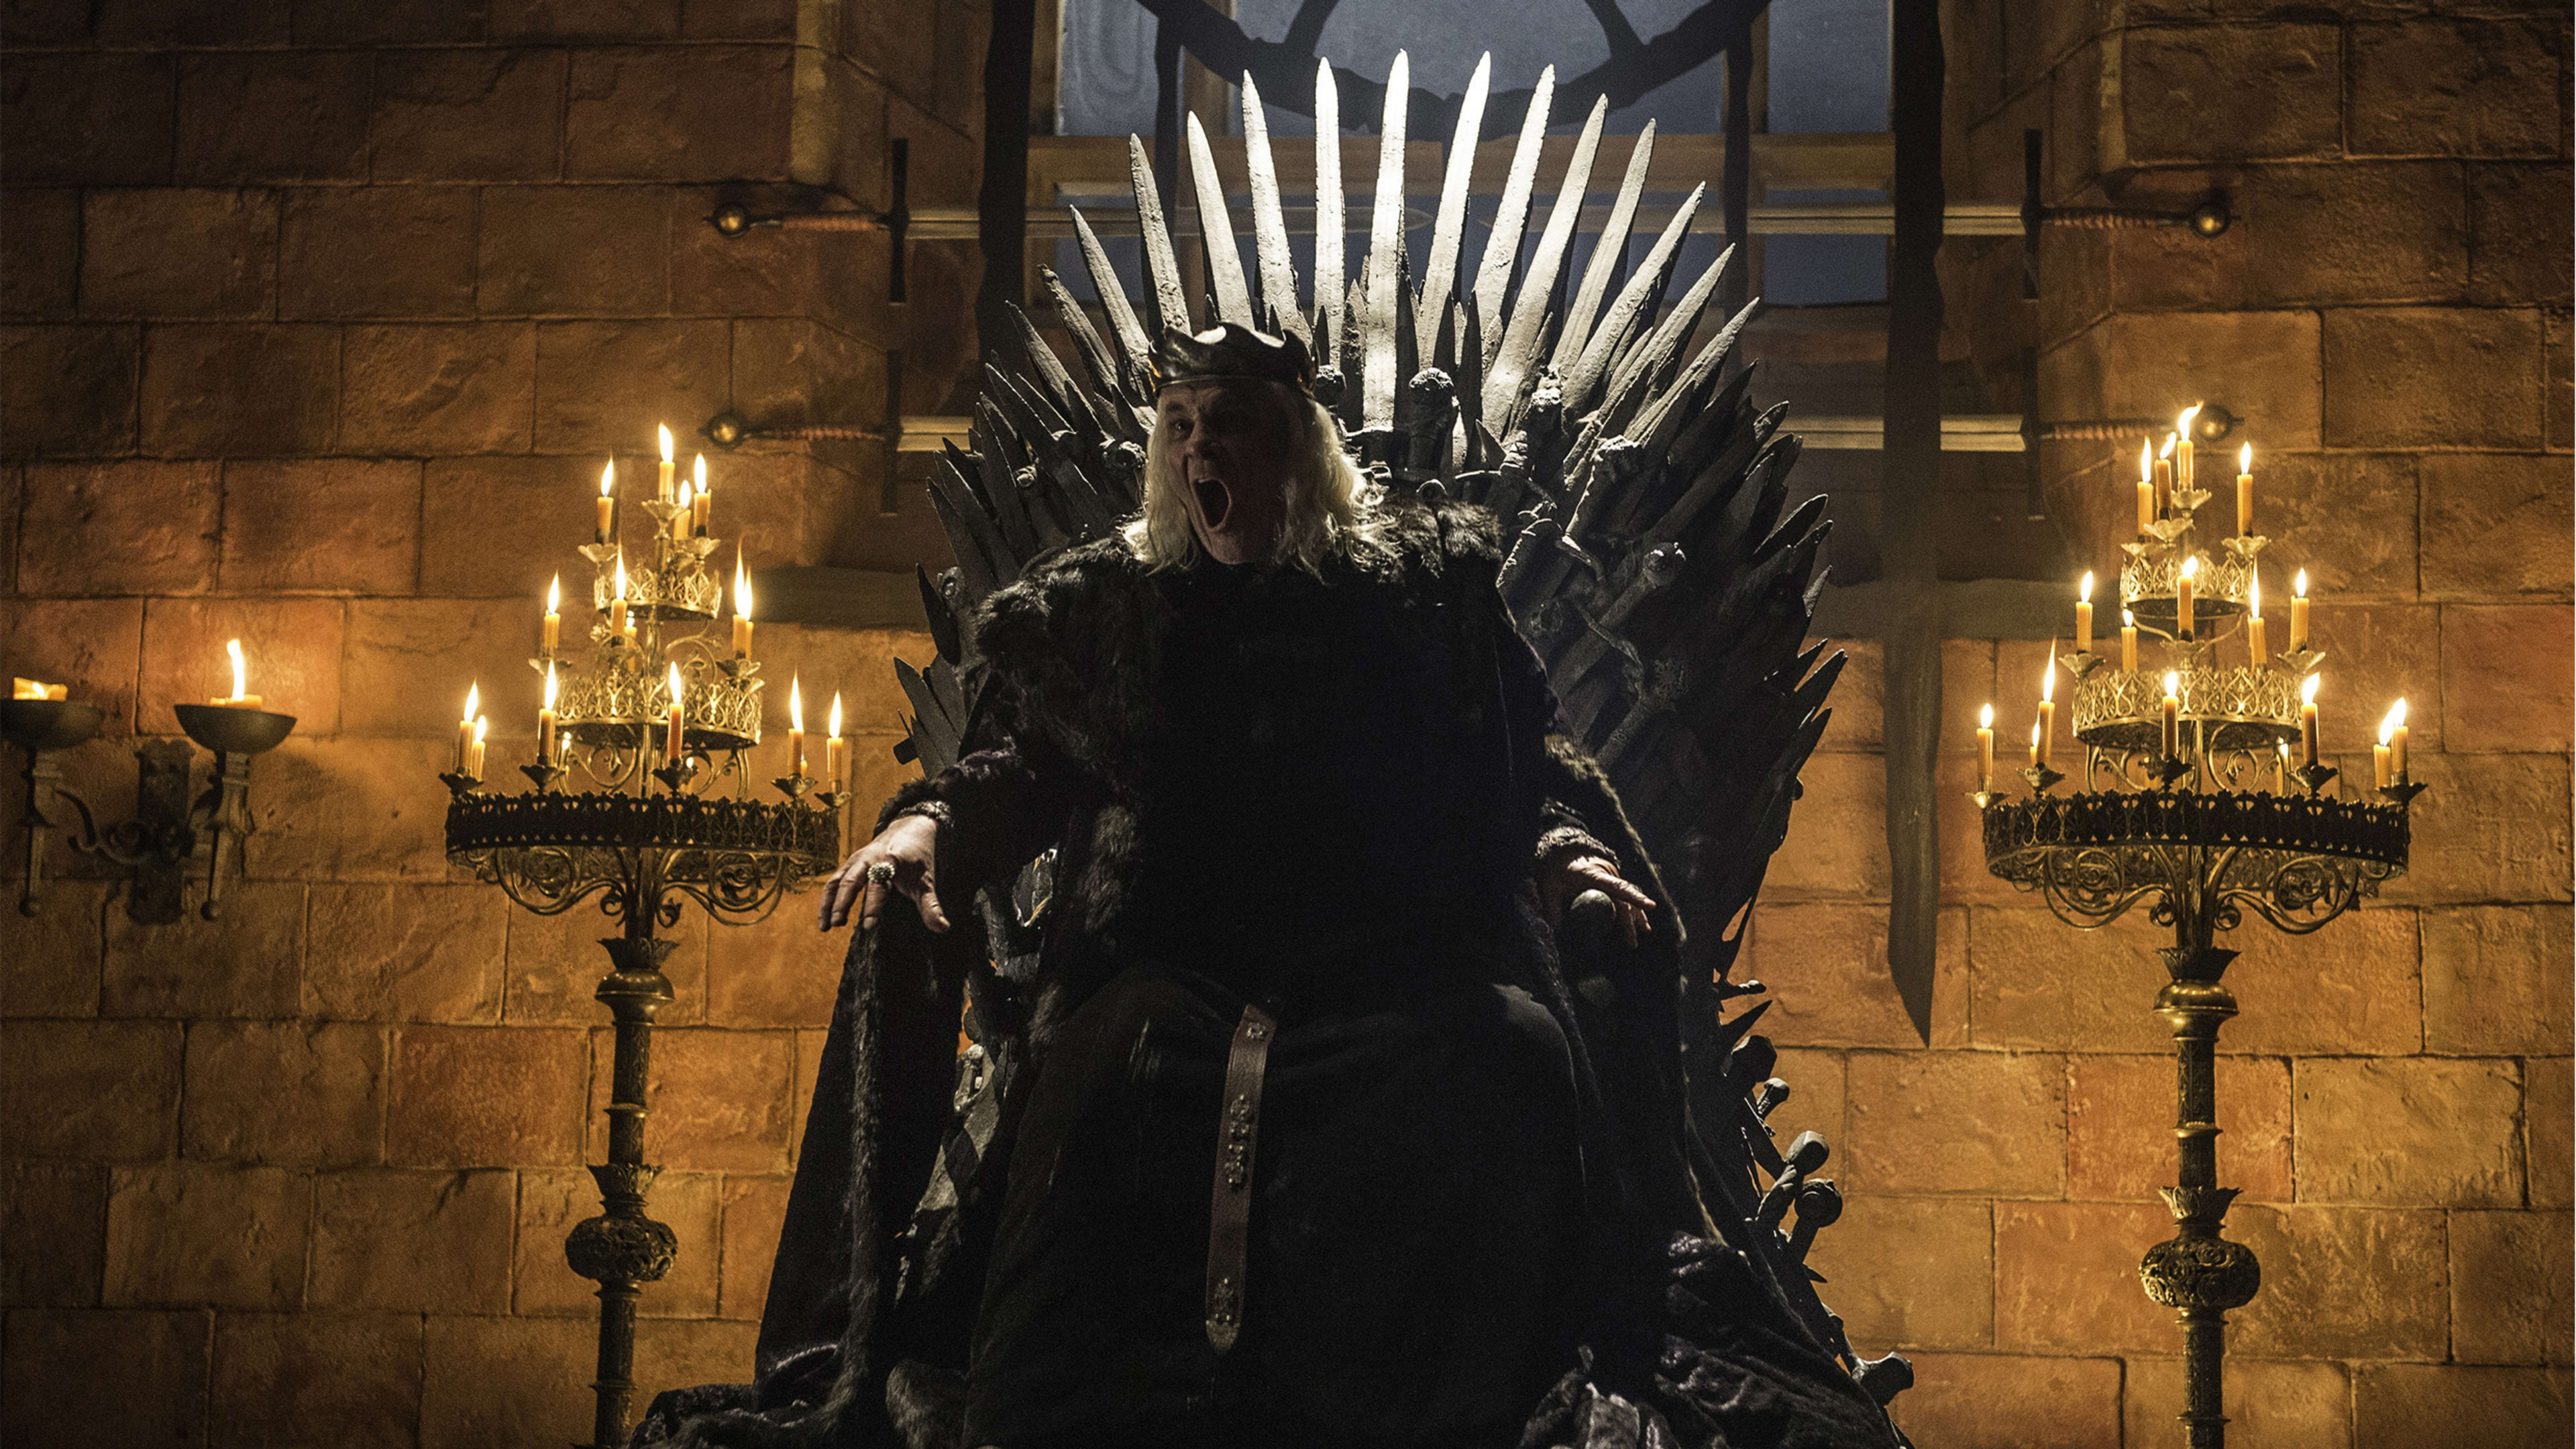 What the Iron Throne reveals about the hidden history of user-friendly design